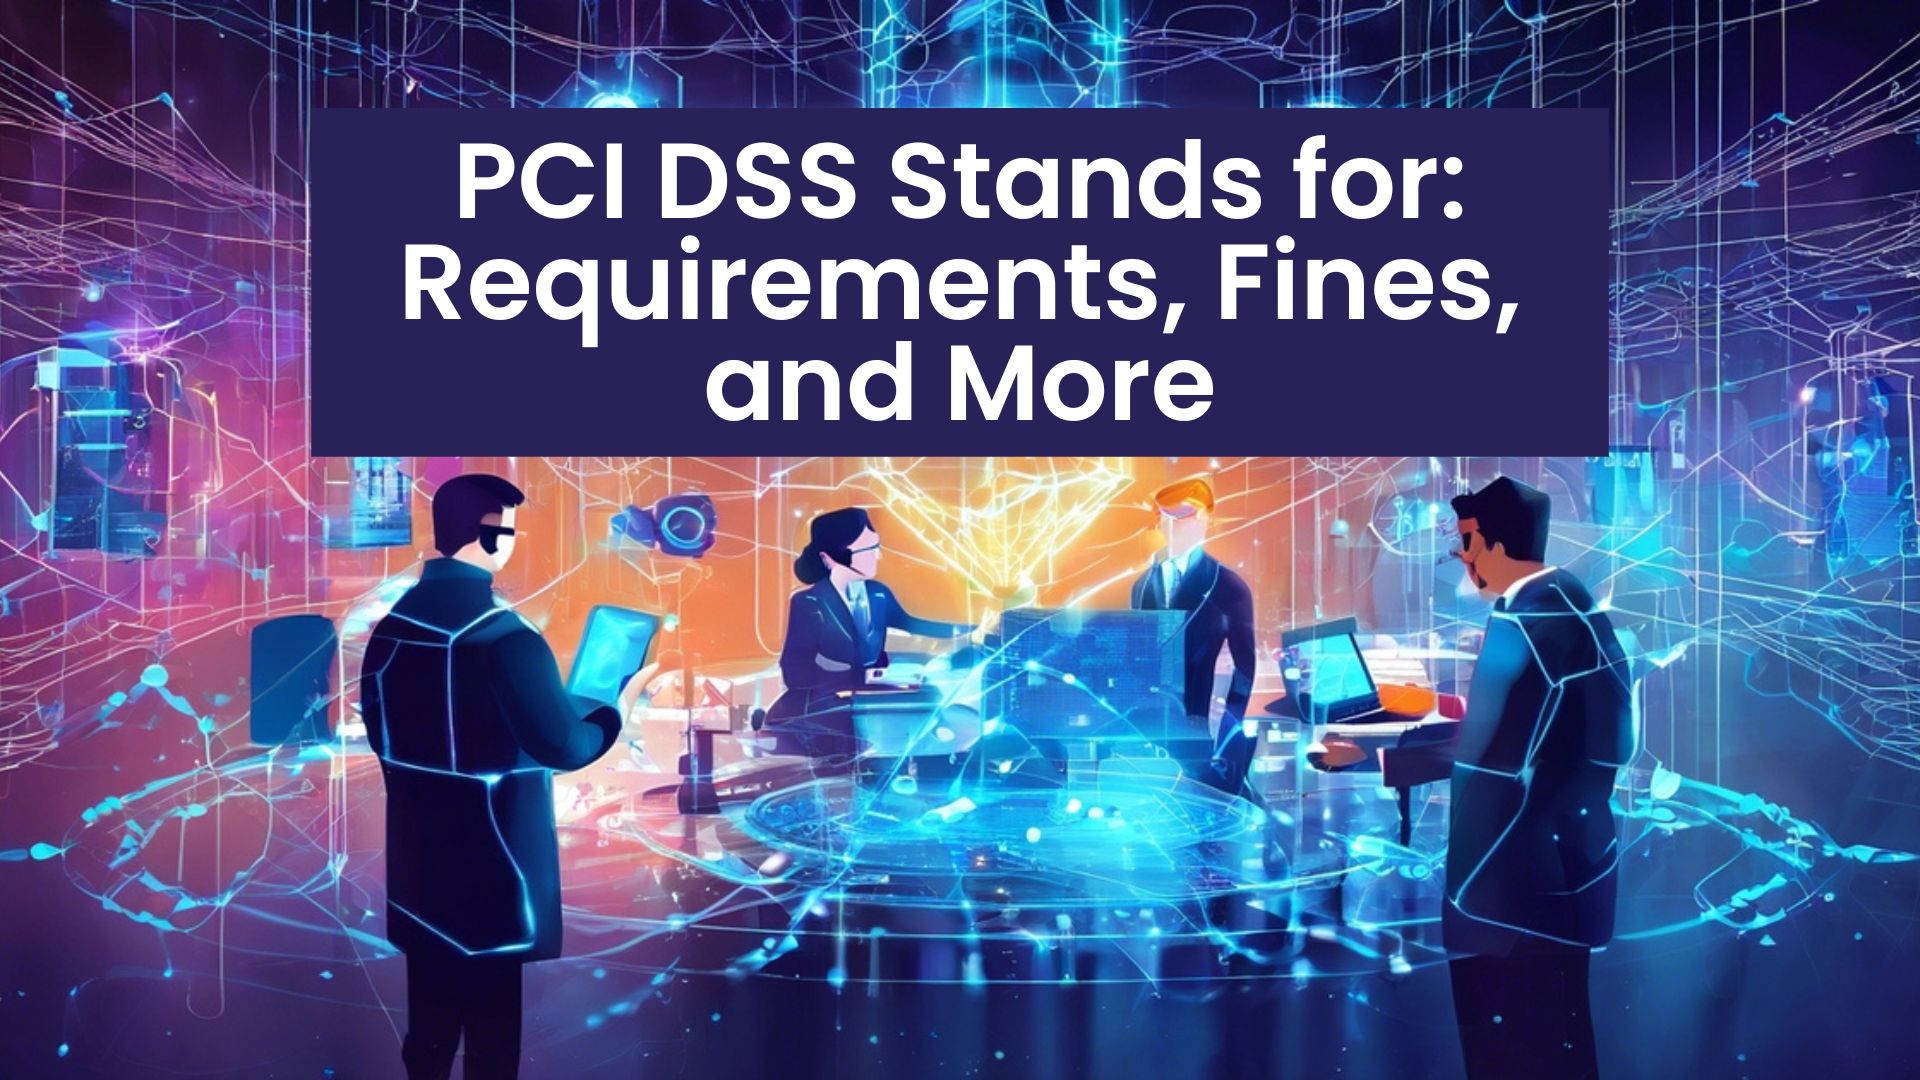 PCI DSS Stands for Requirements, Fines, and More